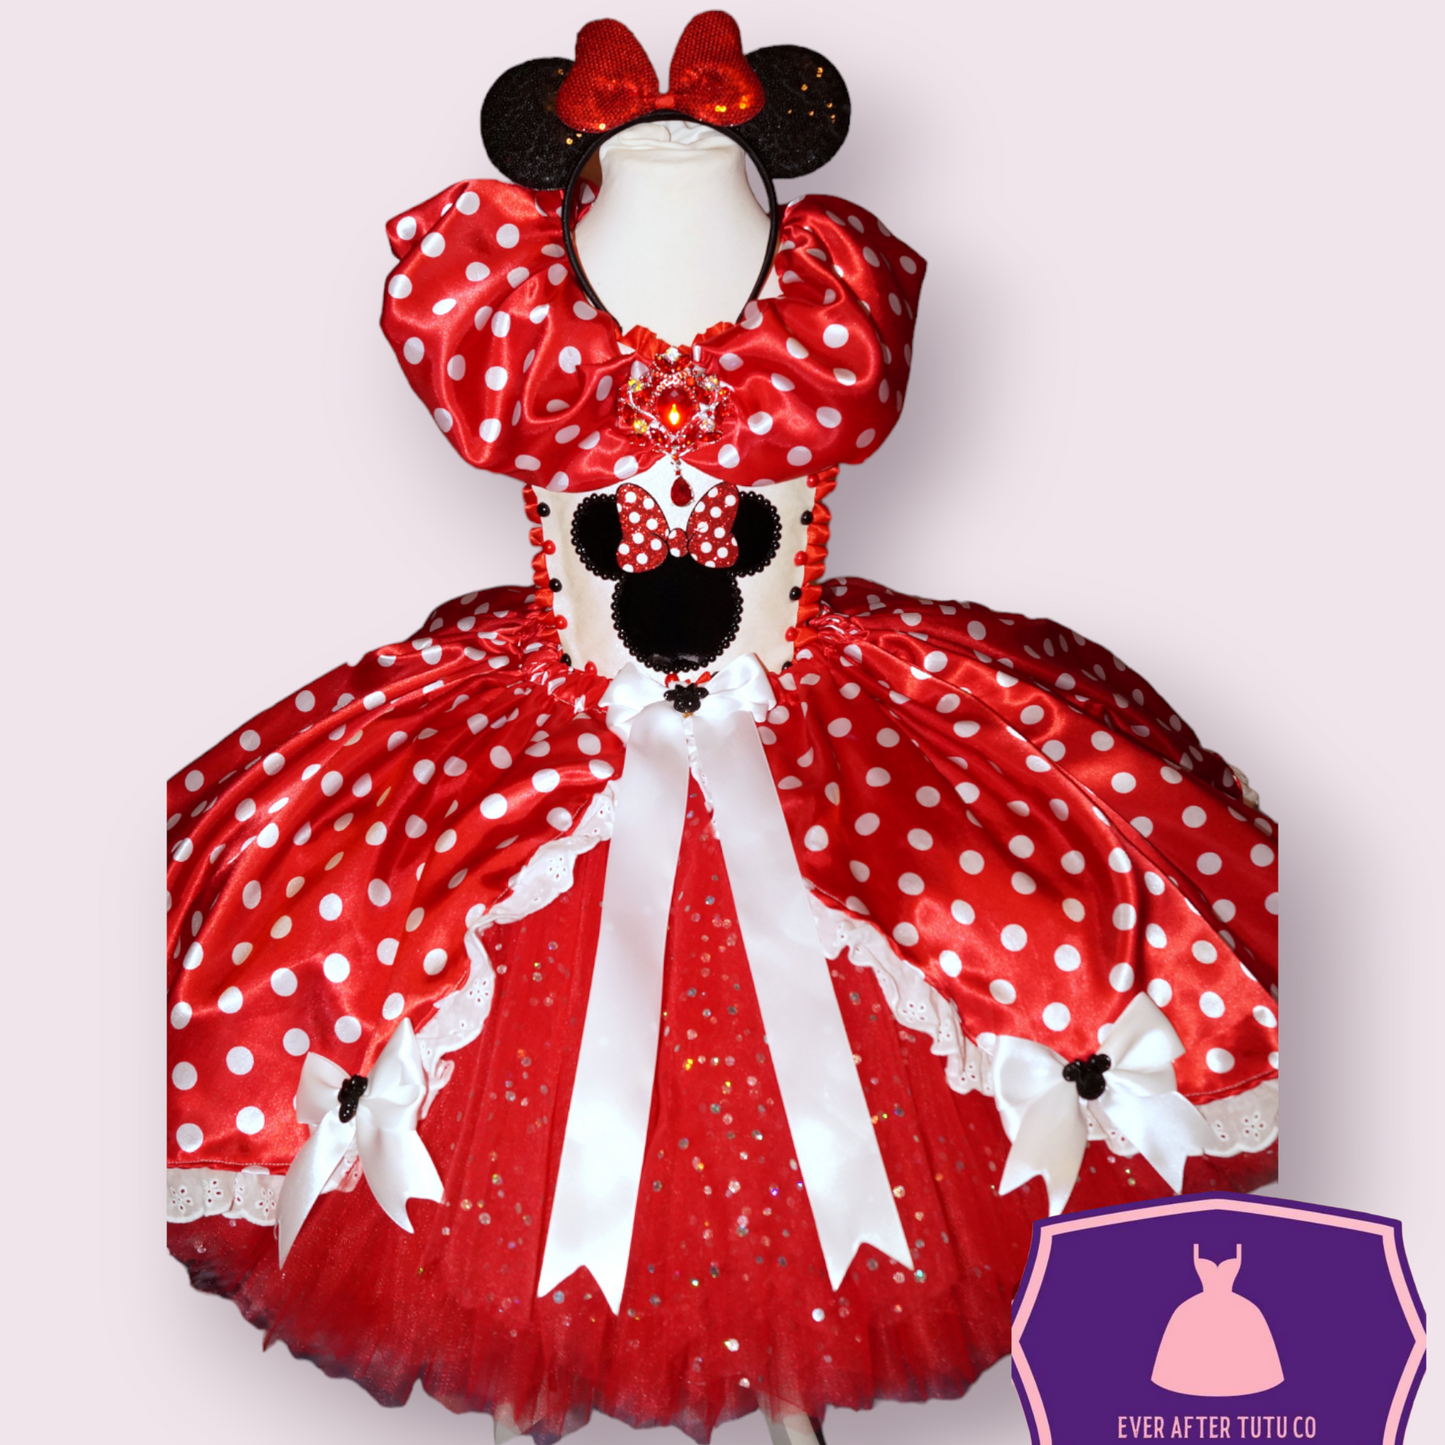 Disney Red and White Polka Dot Minnie Mouse Inspired Tutu Dress